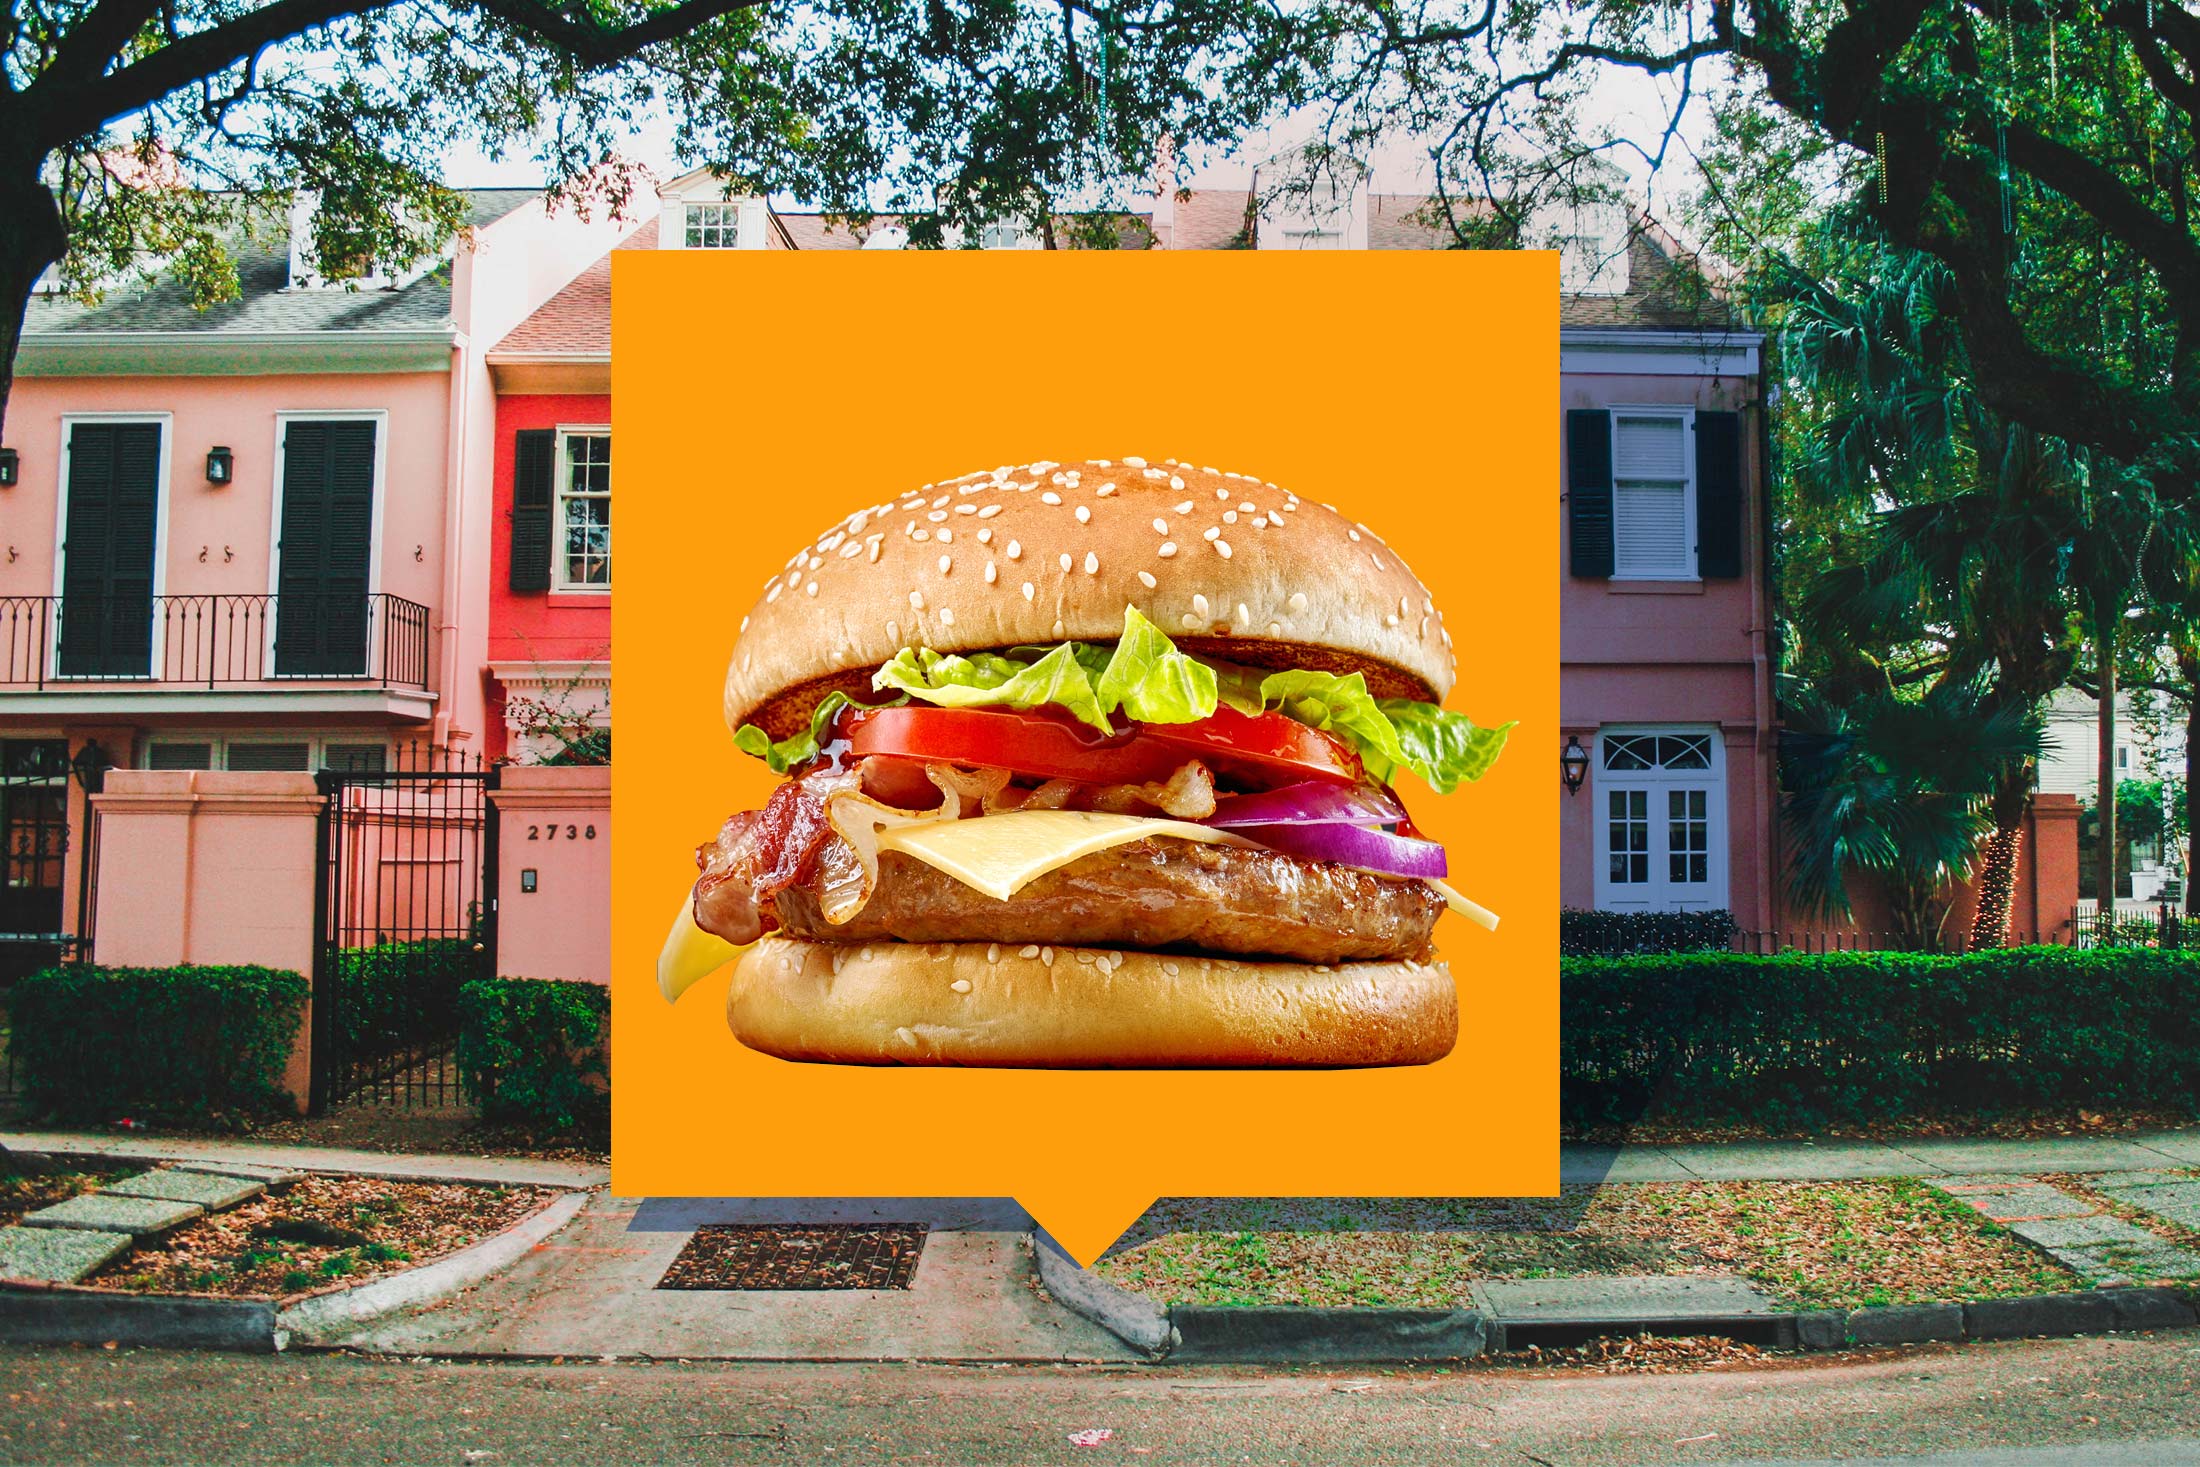 An augmented reality burger ad pops up over a house.